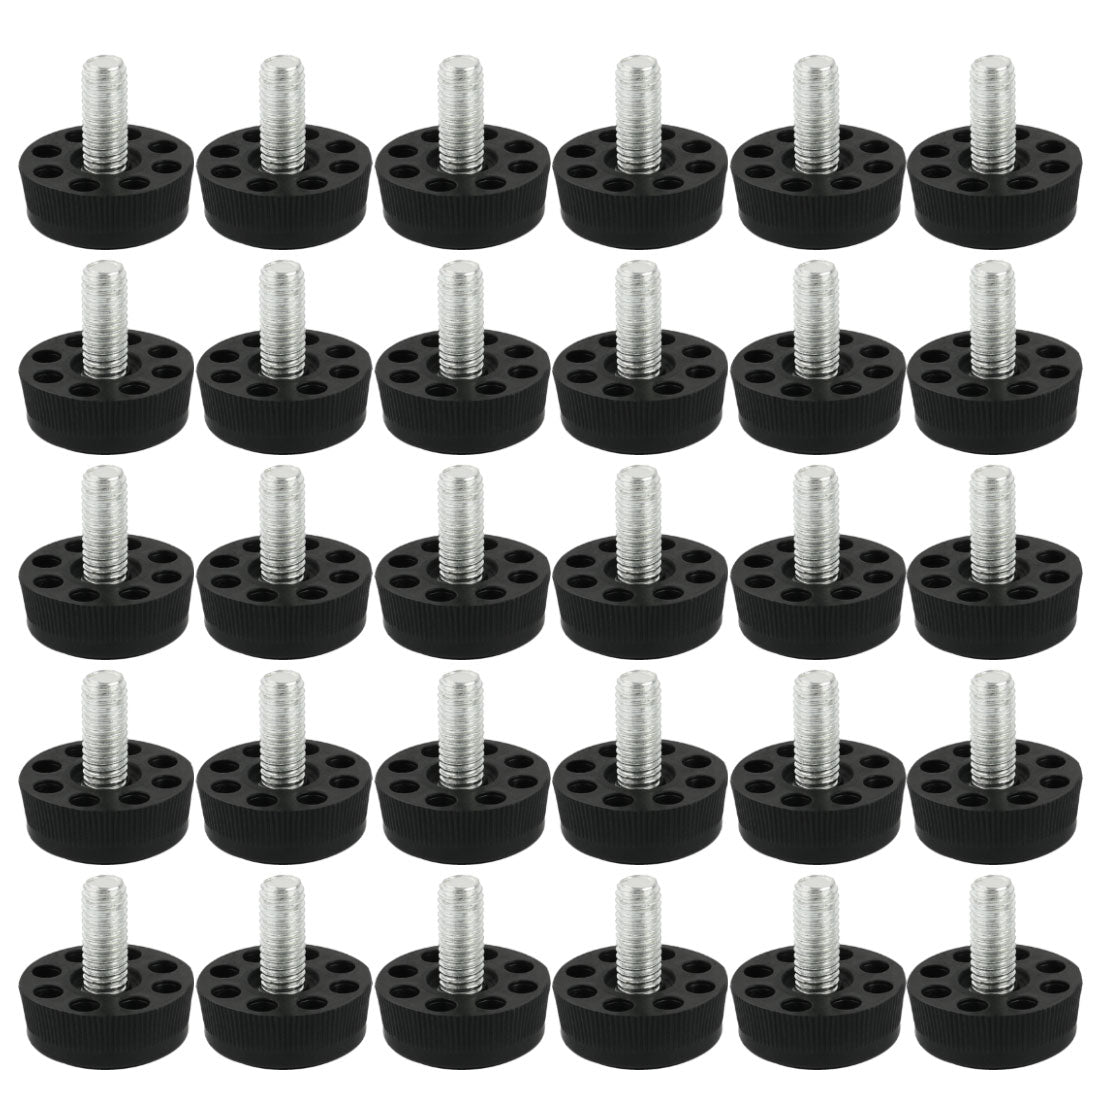 uxcell Uxcell Furniture Screw On Type Glide Leveling Foot M8x20mm Thread 30PCS